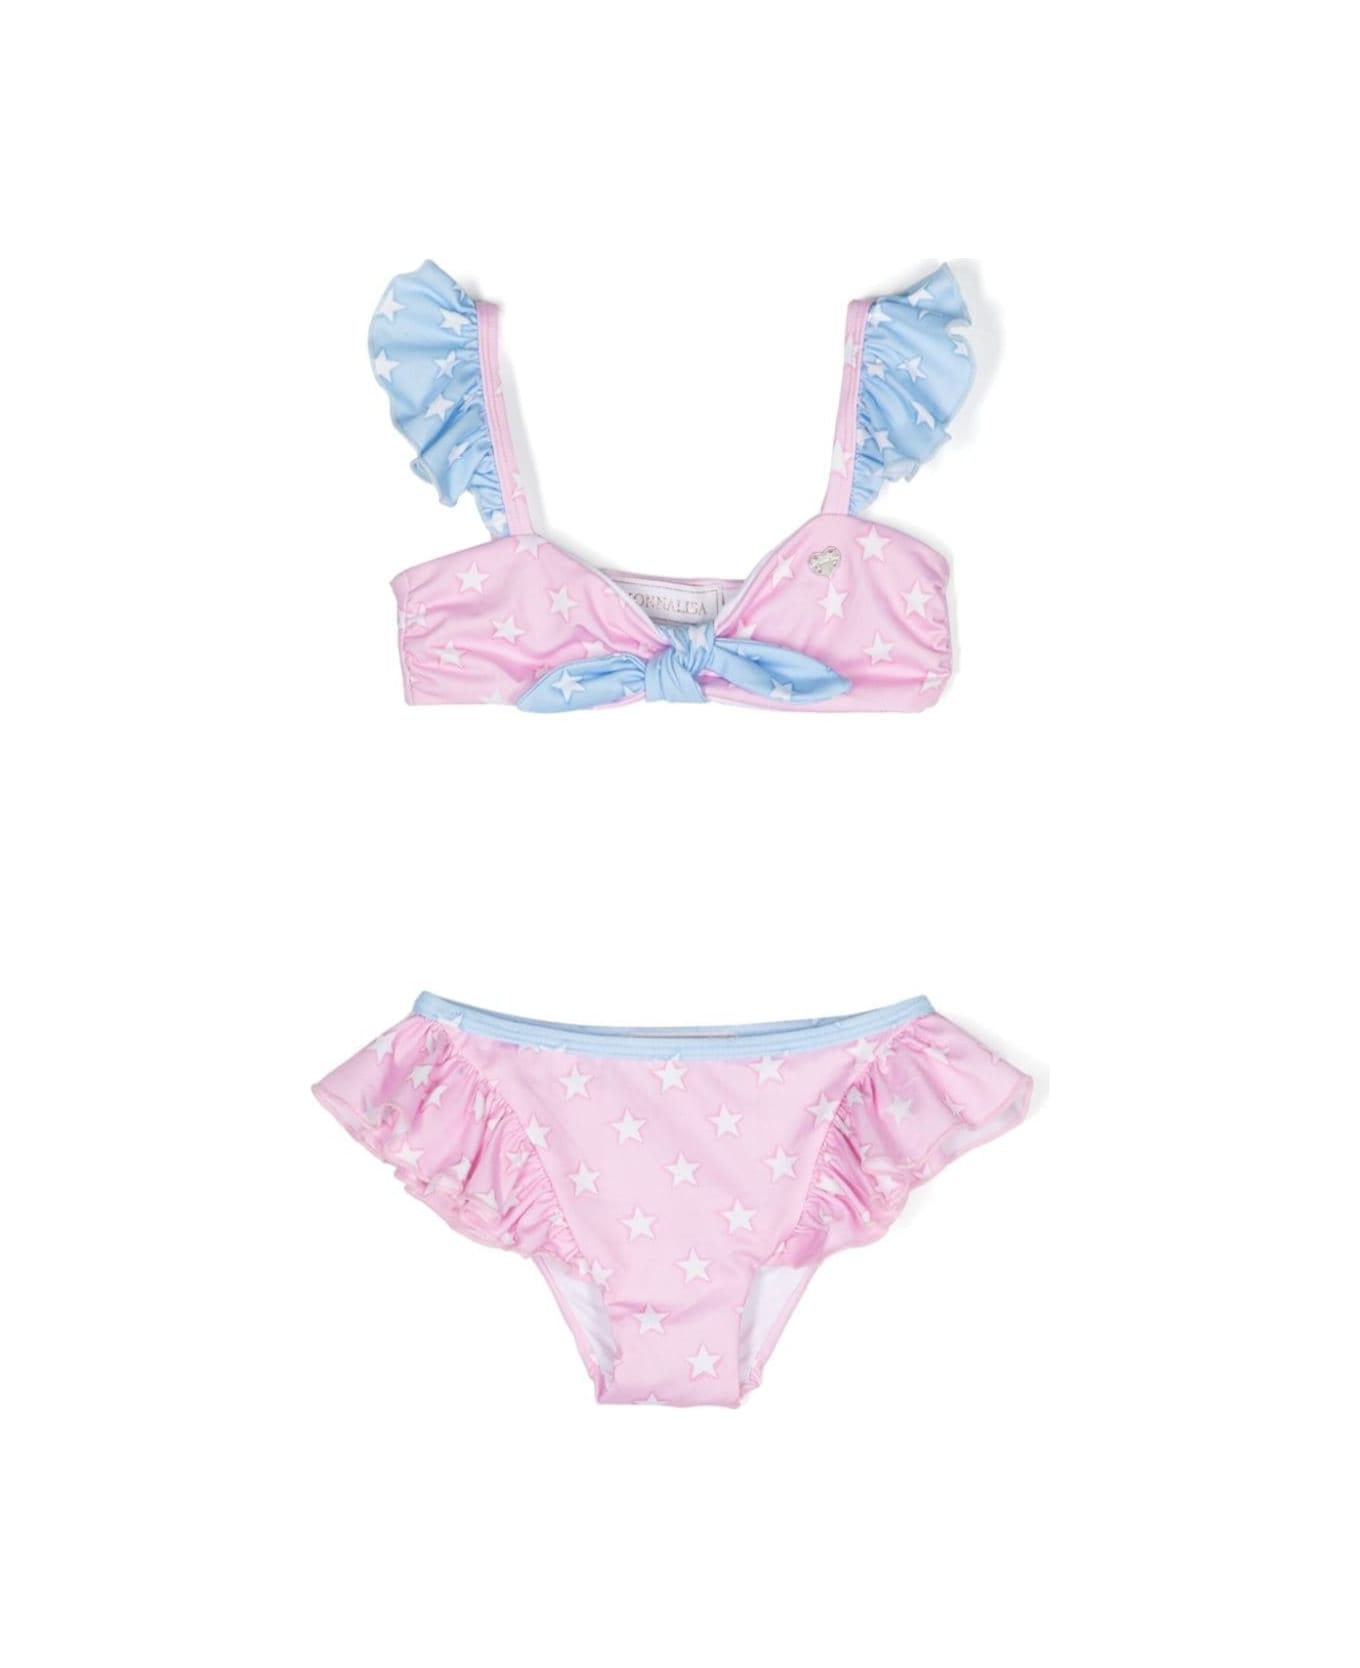 Monnalisa Pink And Light Two Piece Bikini Set With Star Print In Stretch Fabric Girl - Multicolor